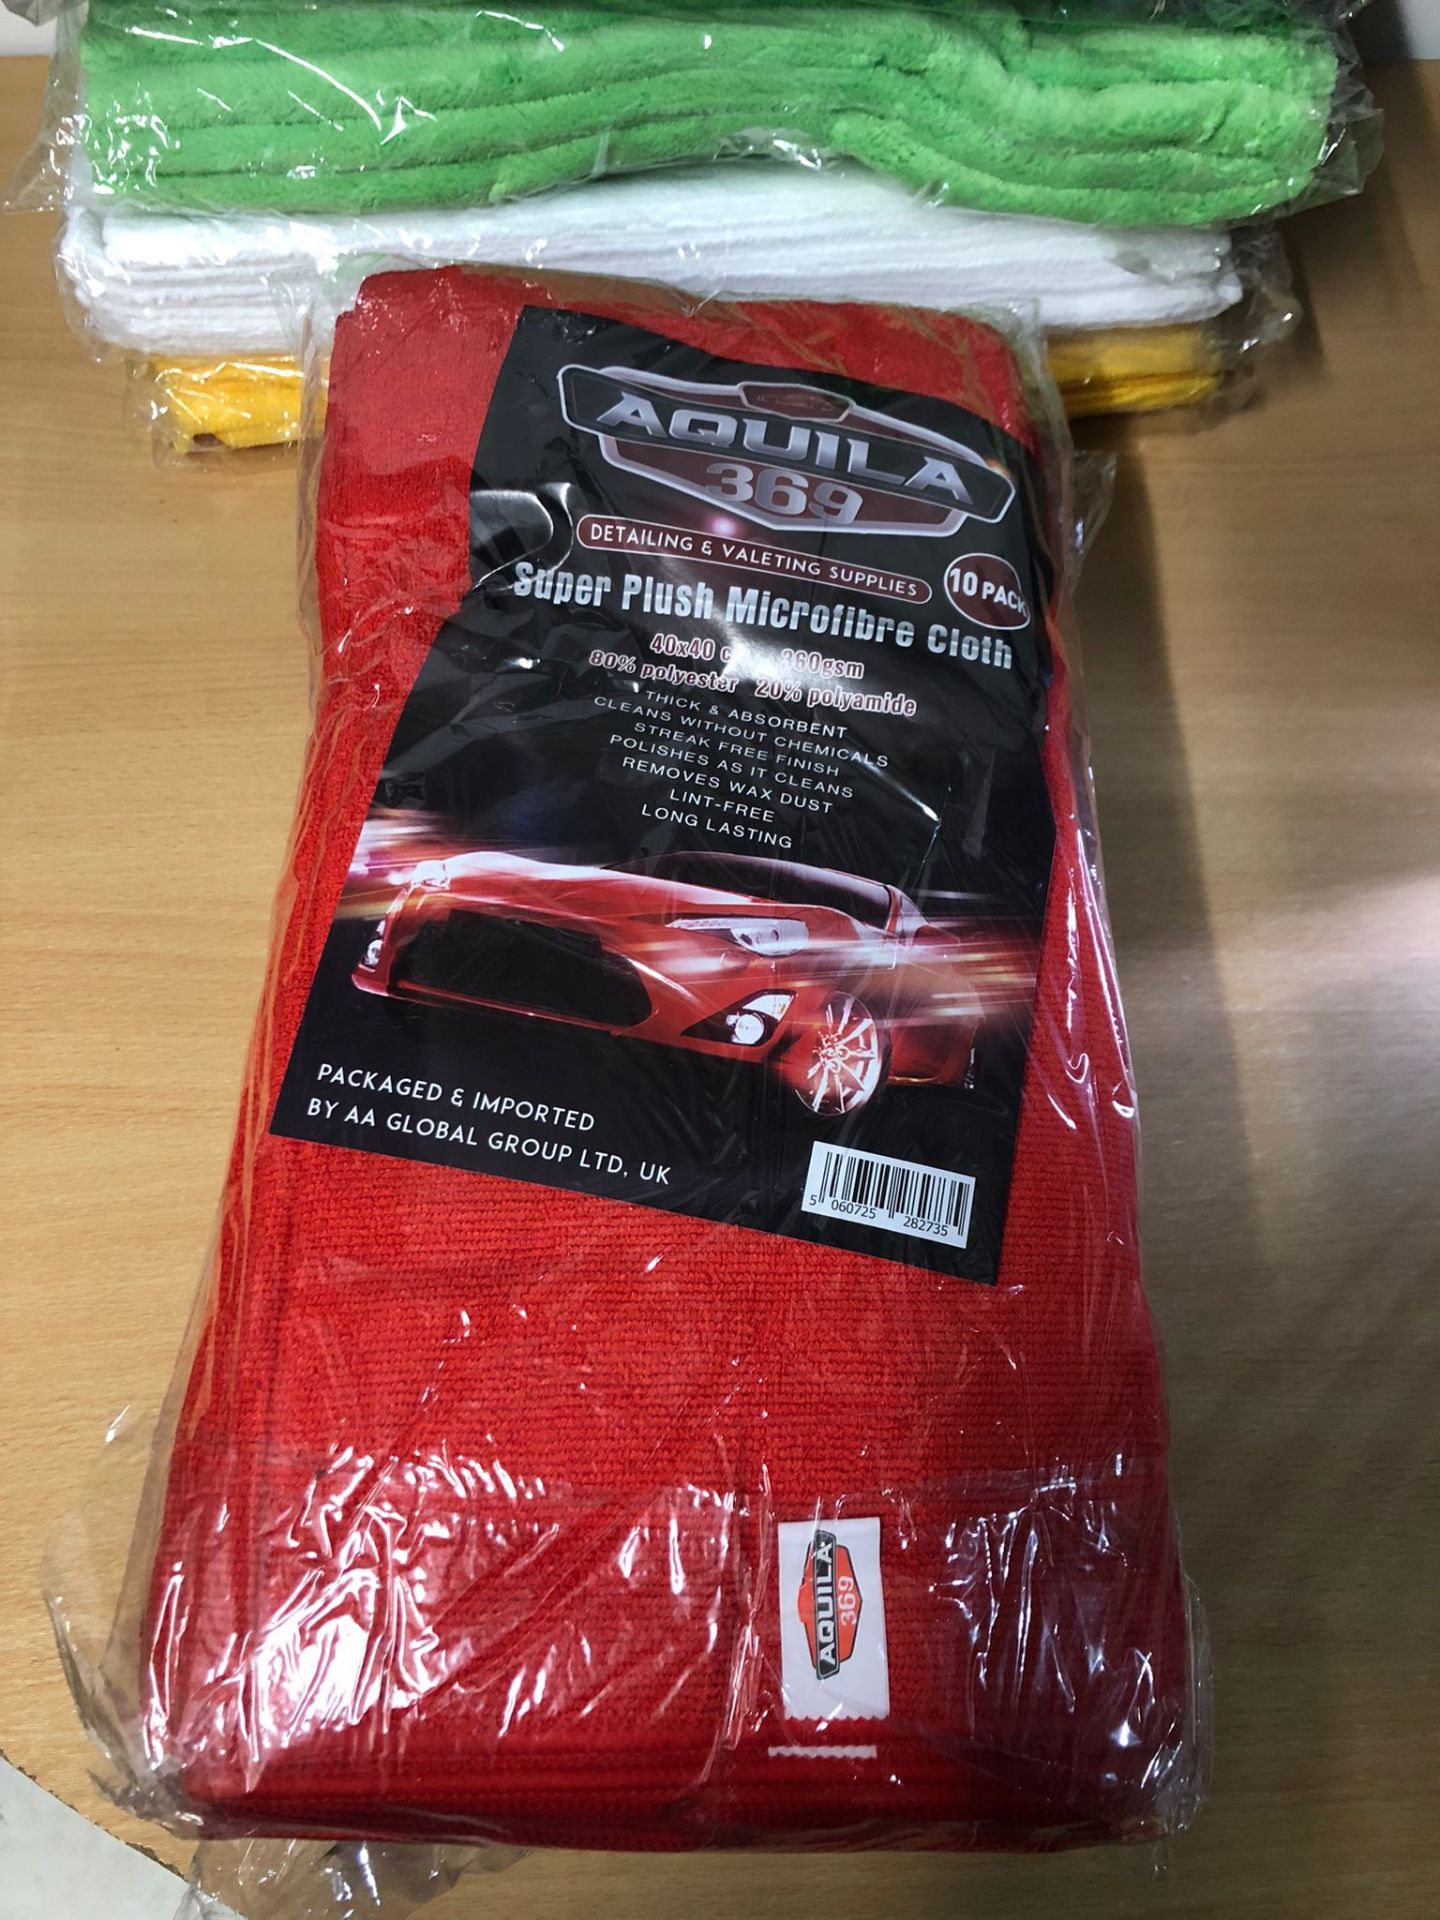 6 Packs of Detailing and Valeting Microfibre Cleaning Cloths Brand New - Image 3 of 9